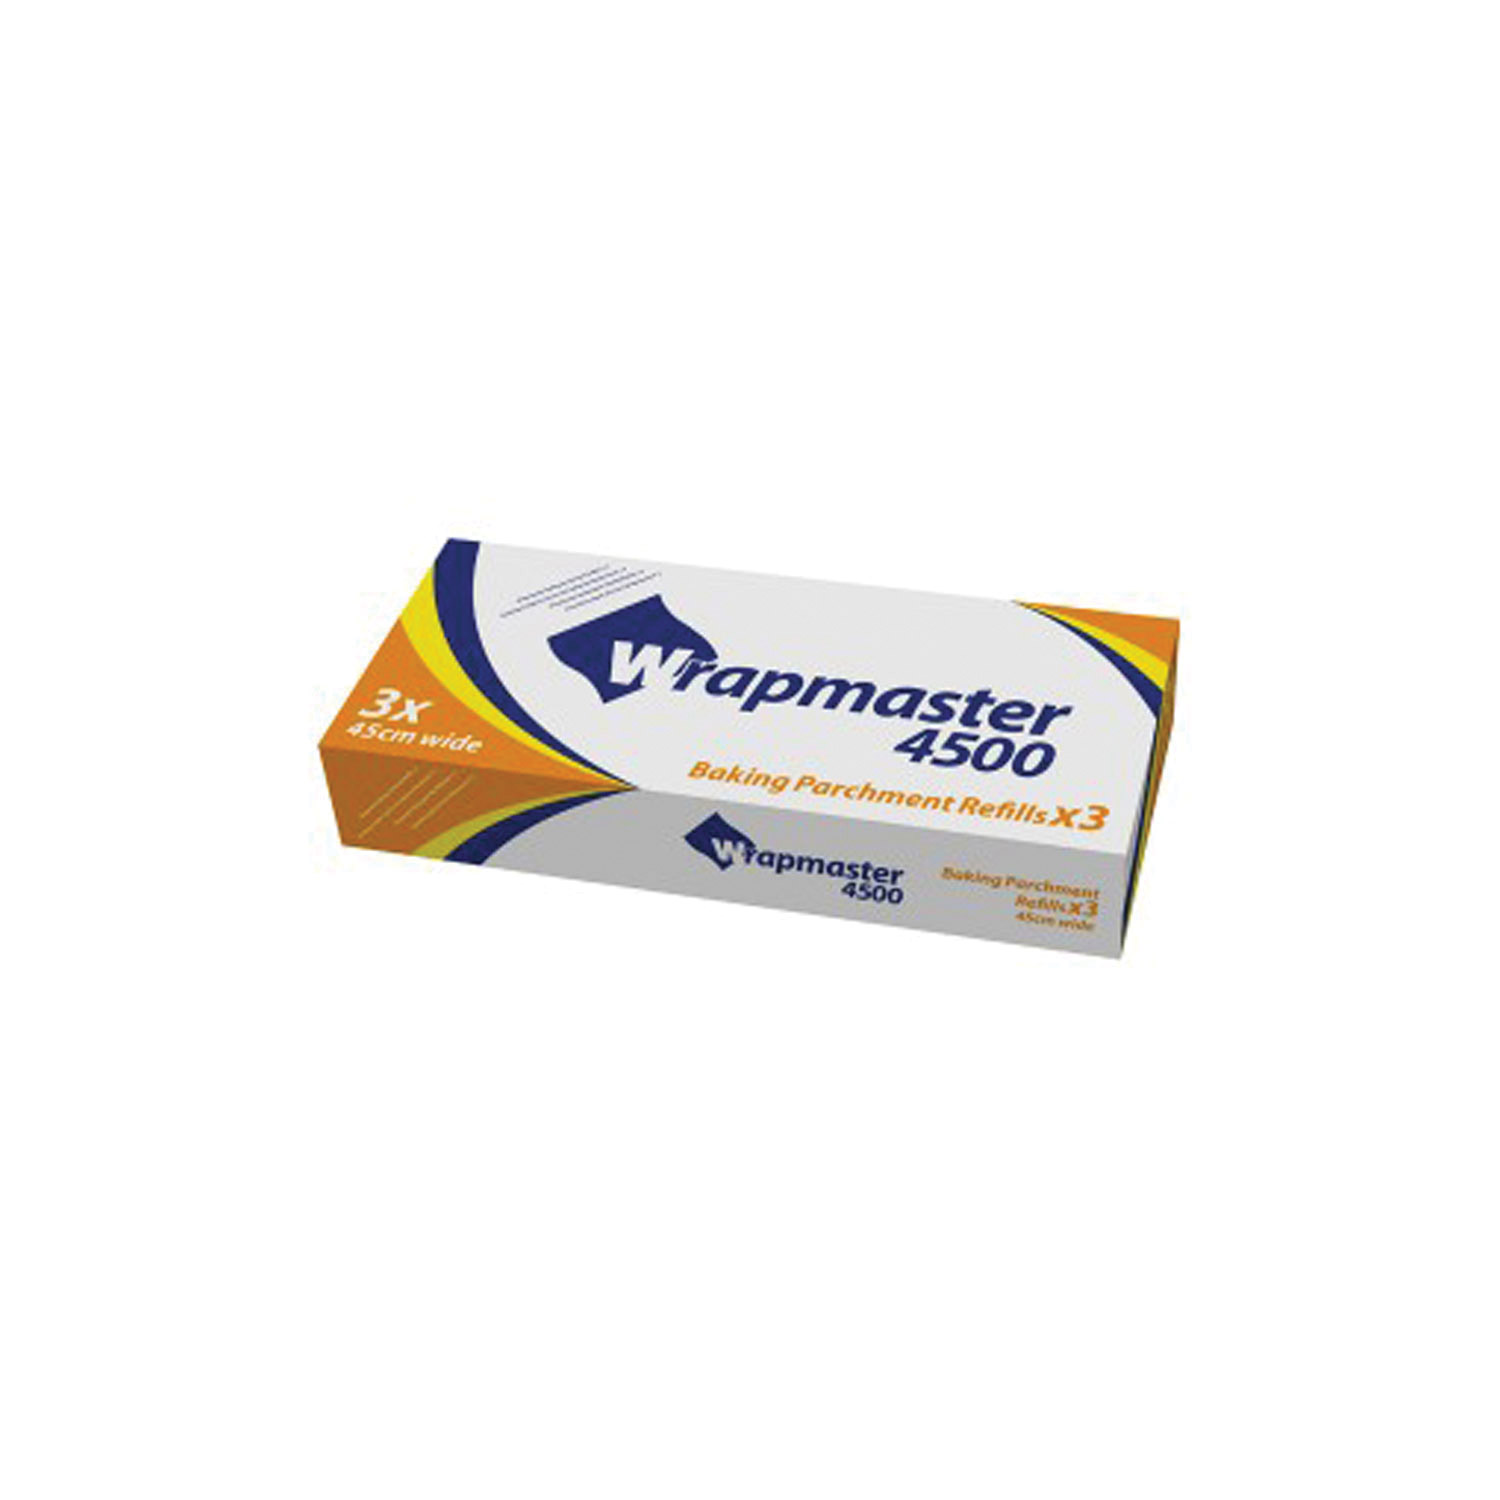 30Cm Wrapmaster Refill Parchment Roll 50M - Box Of 3